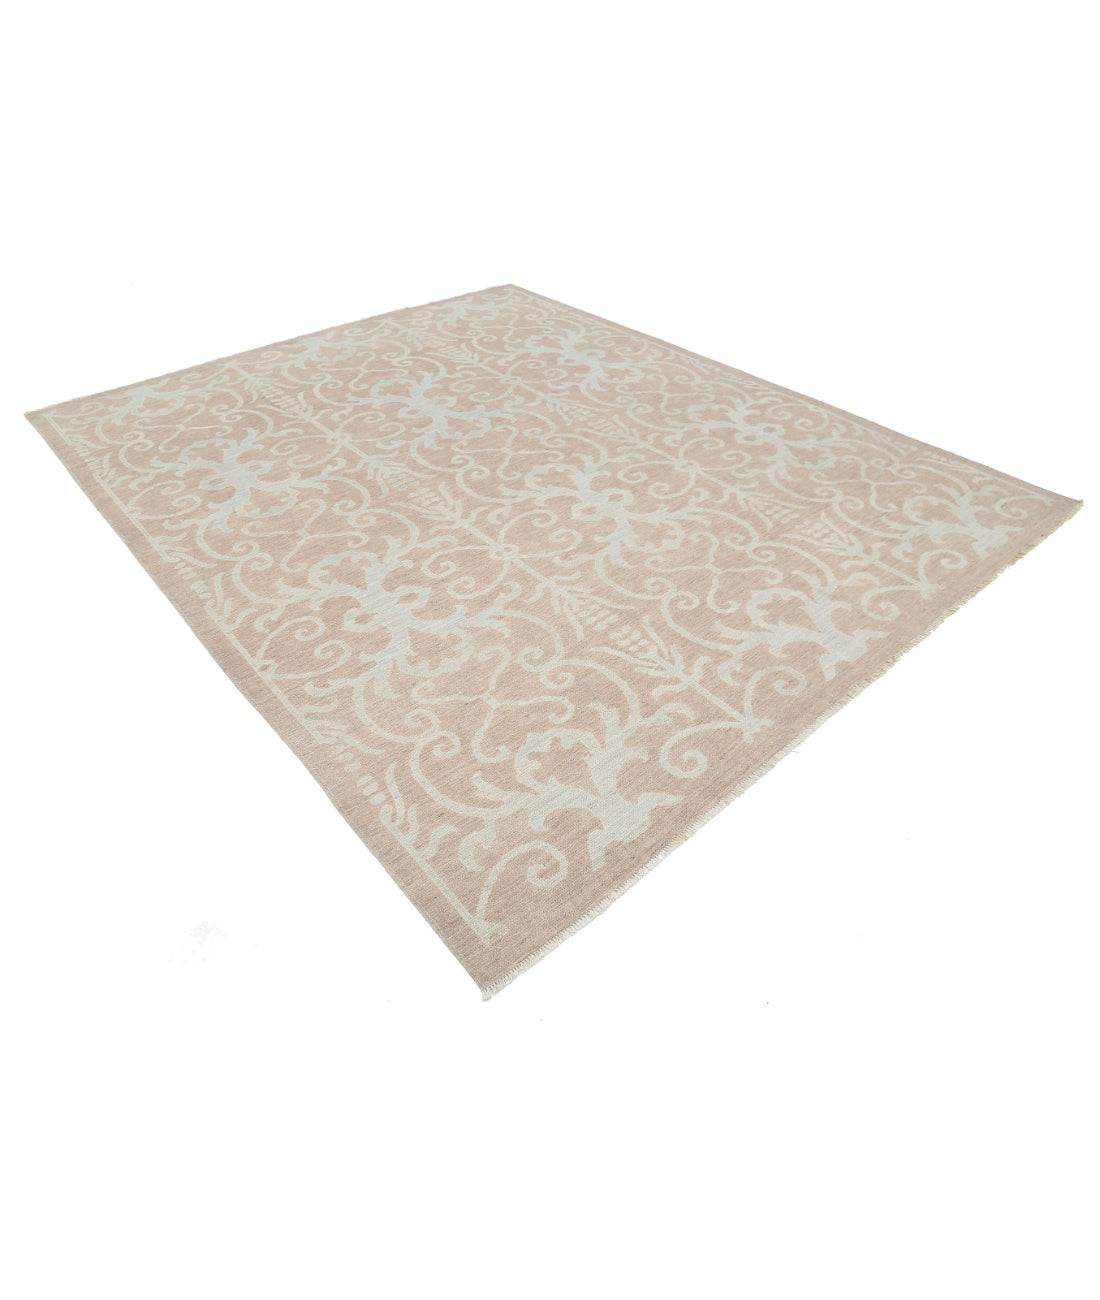 Hand Knotted Oushak Wool Rug - 8'1'' x 9'9'' 8'1'' x 9'9'' (243 X 293) / Taupe / Blue